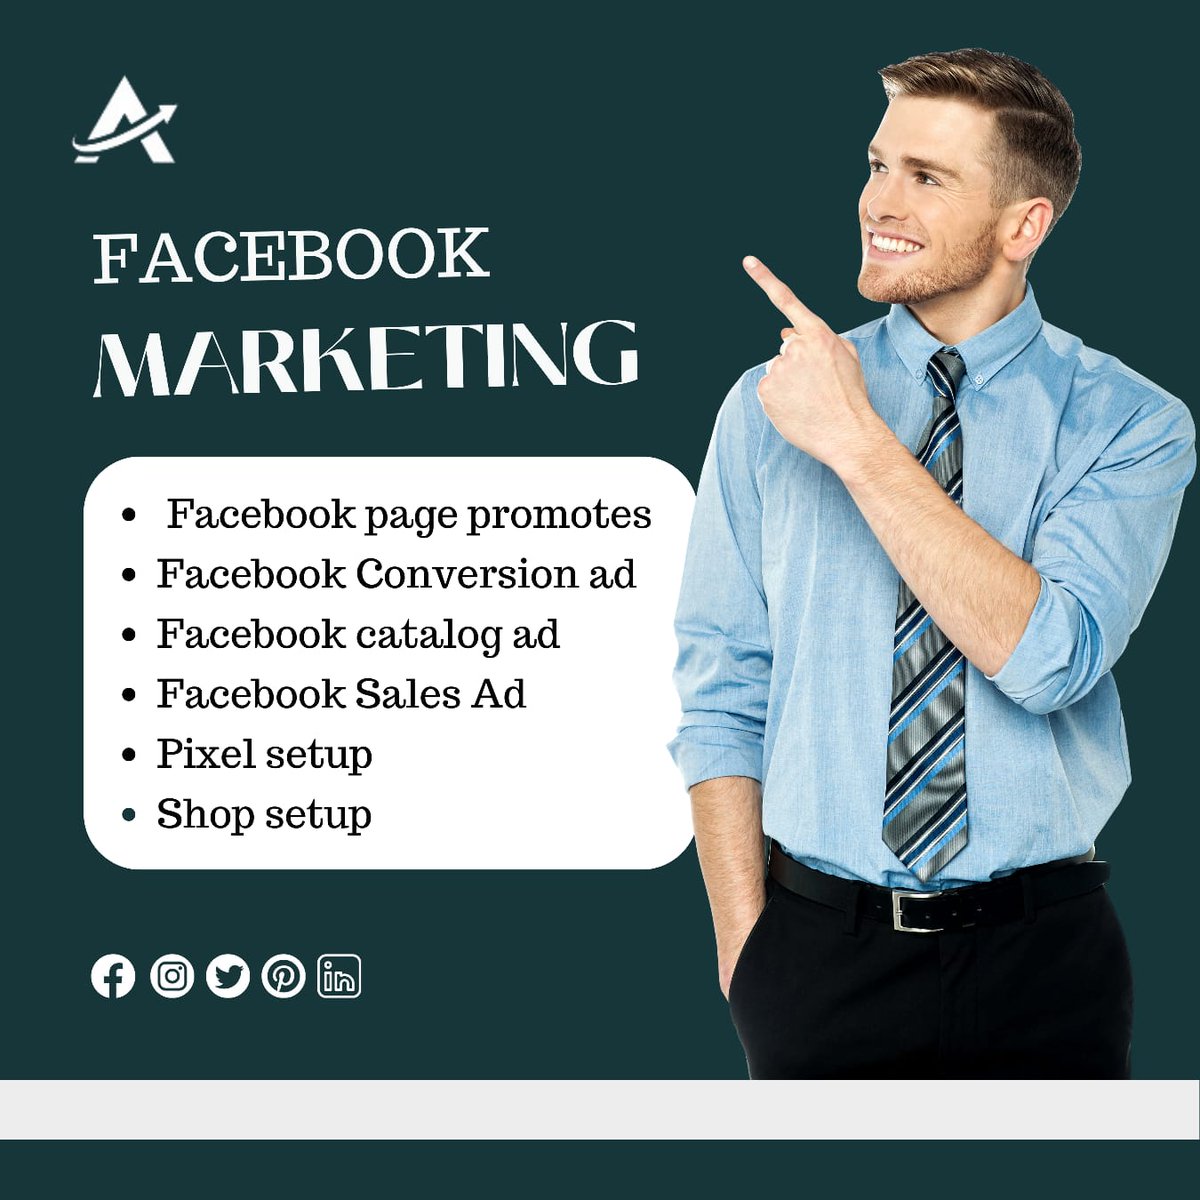 💥Grow Your Business With Facebook Marketing💥
#facebookmarketing #usa #ads #facebooksalesads #page #facebookpixelsetup #facebookads #facebookboosting #facebookshop #facebookshopsetup #facebookadvertising  #facebookmarketingtips #facebookmarketingexperts #facebookmarketingguide